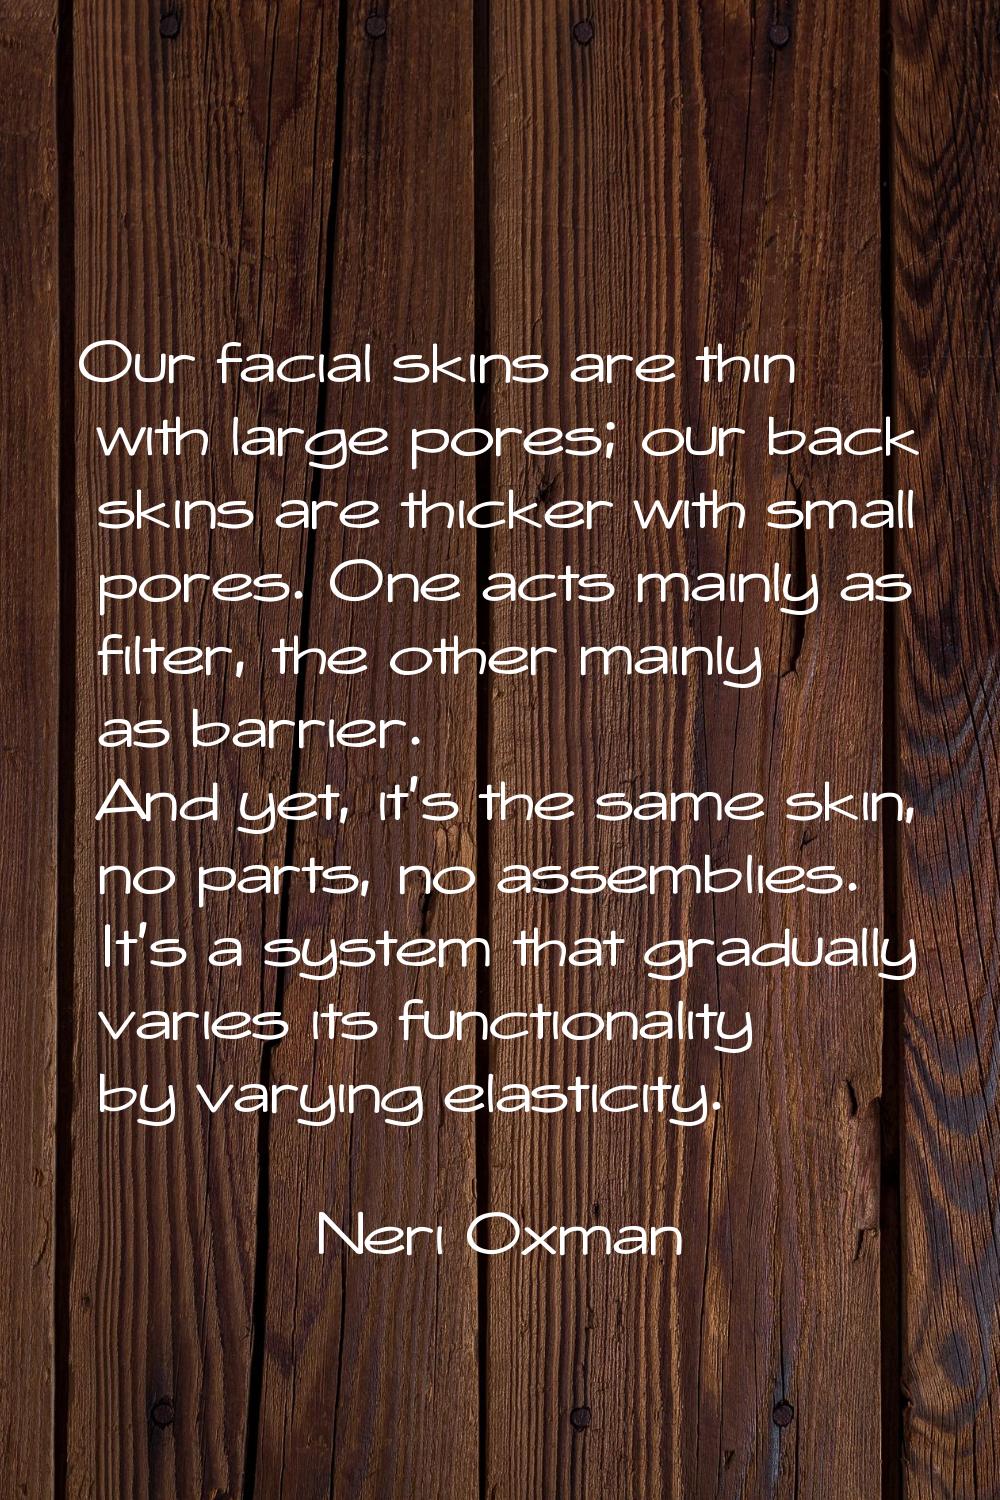 Our facial skins are thin with large pores; our back skins are thicker with small pores. One acts m